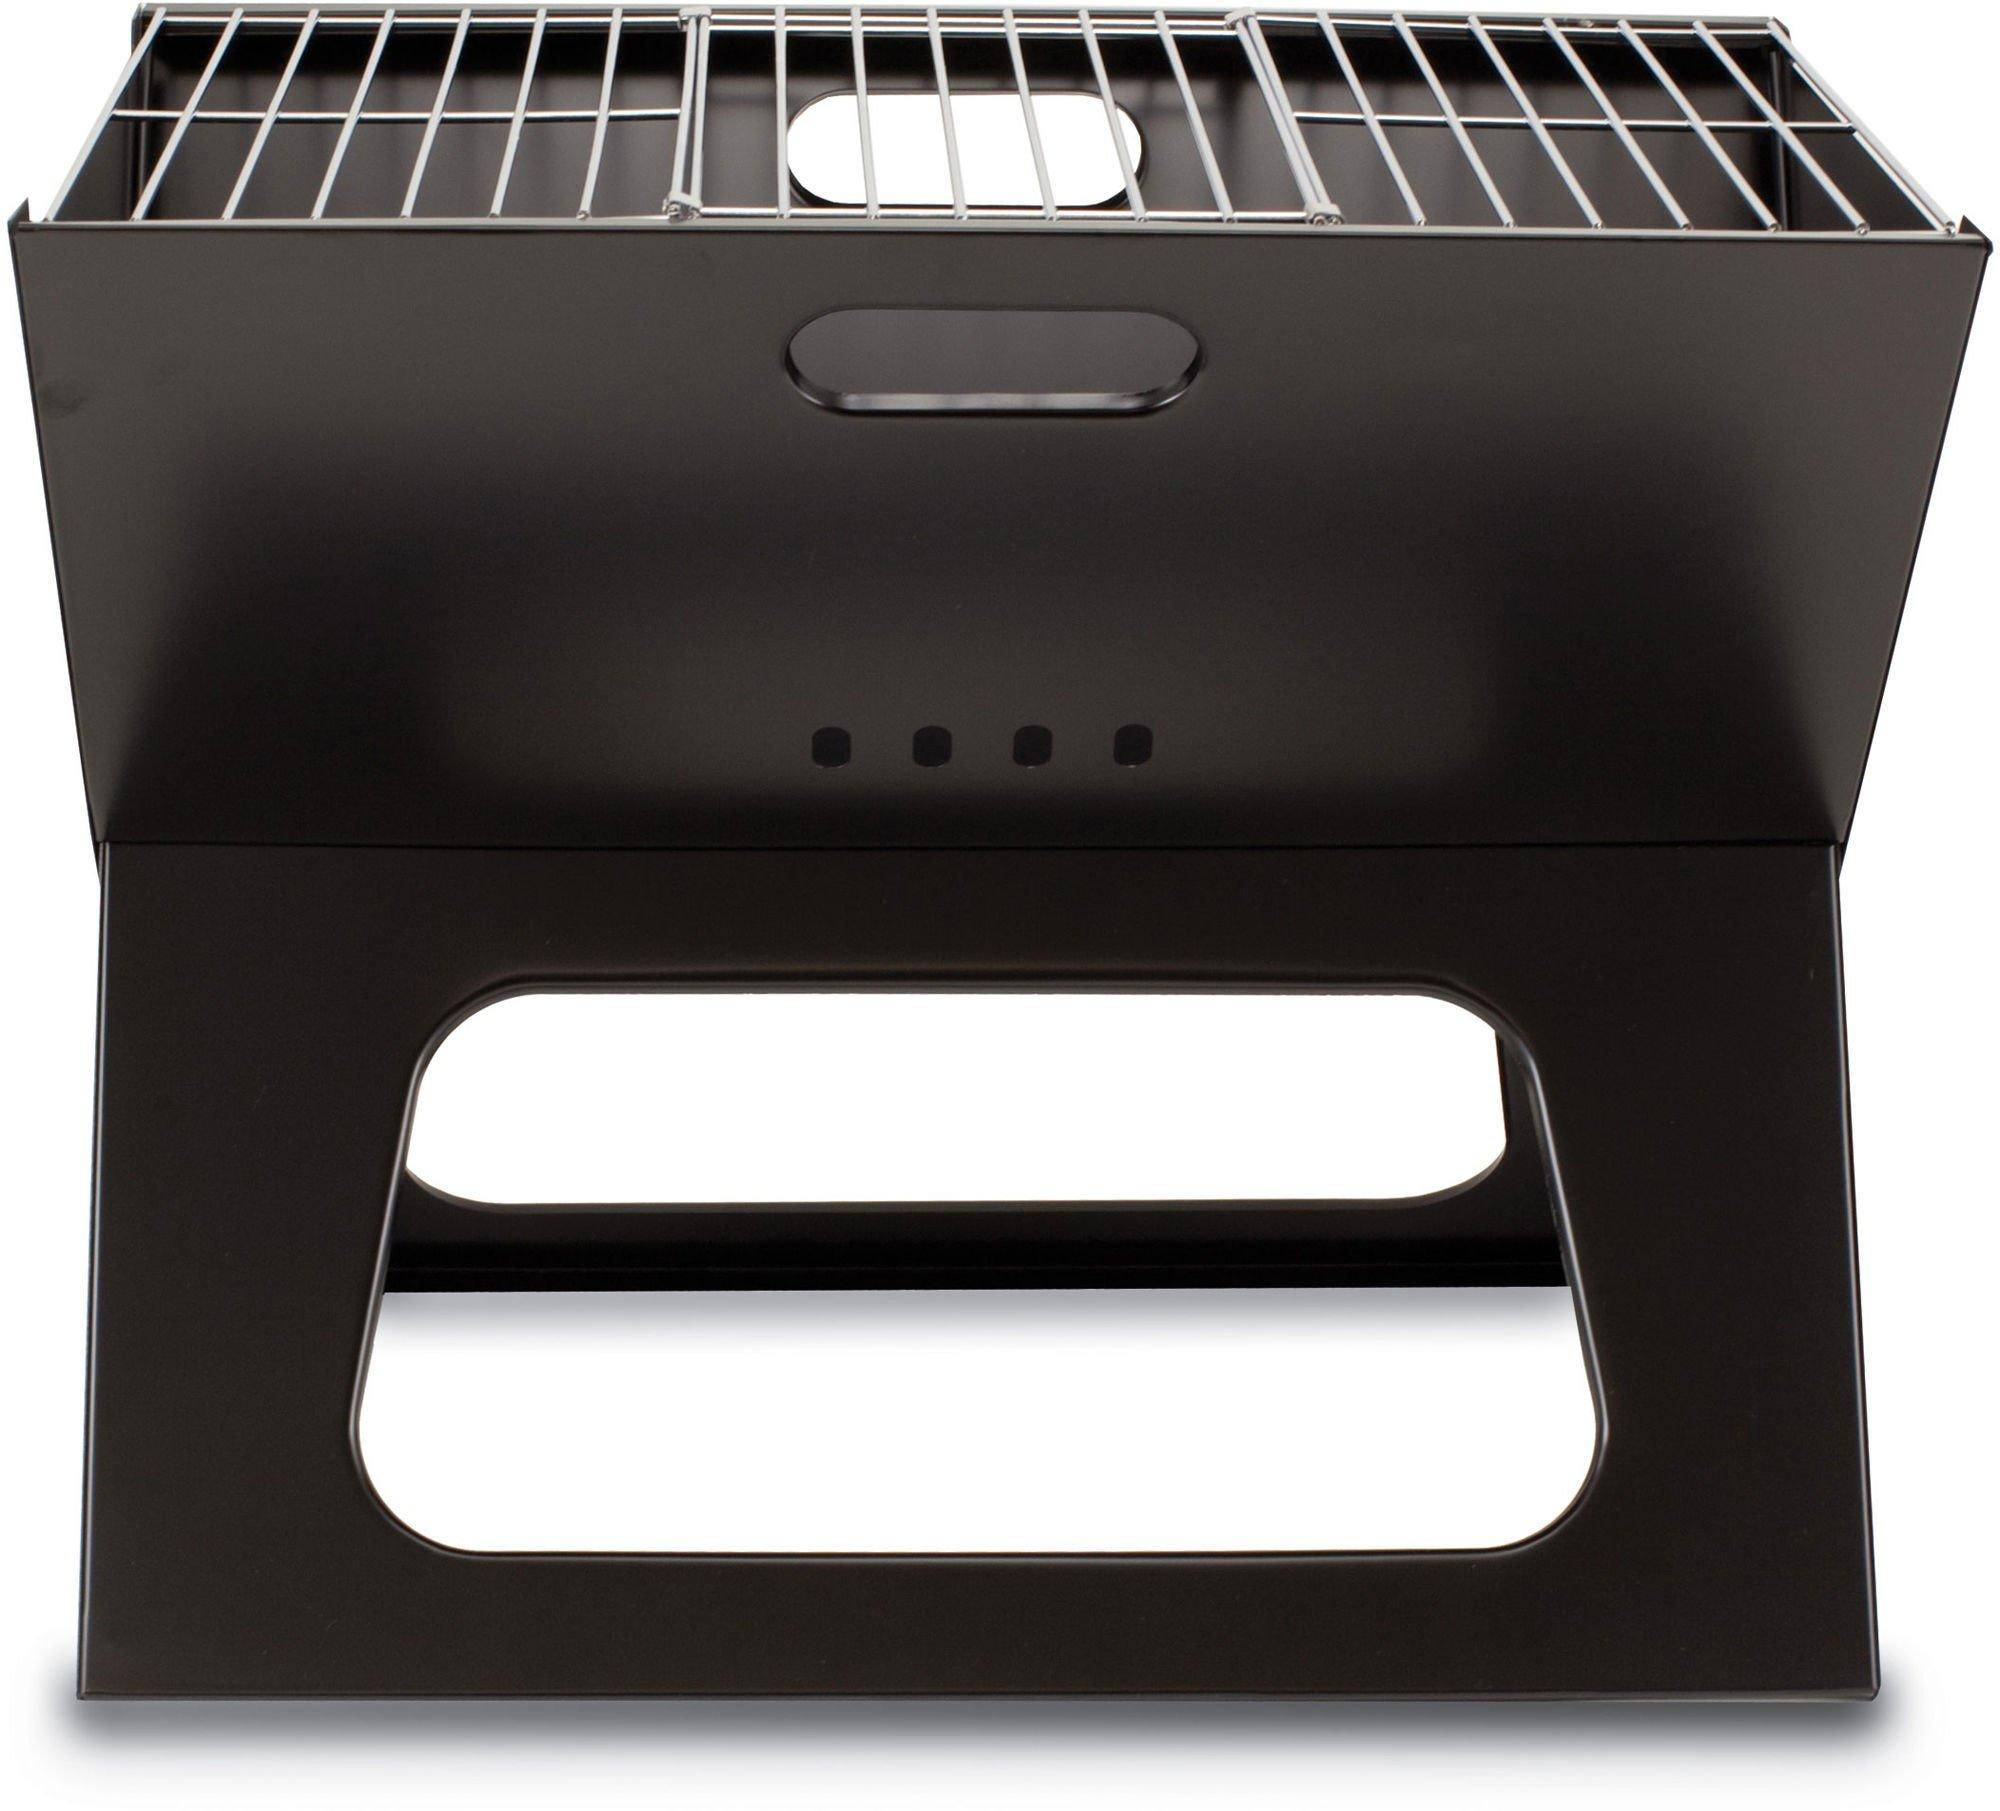 X Grill Portable Charcoal Grill